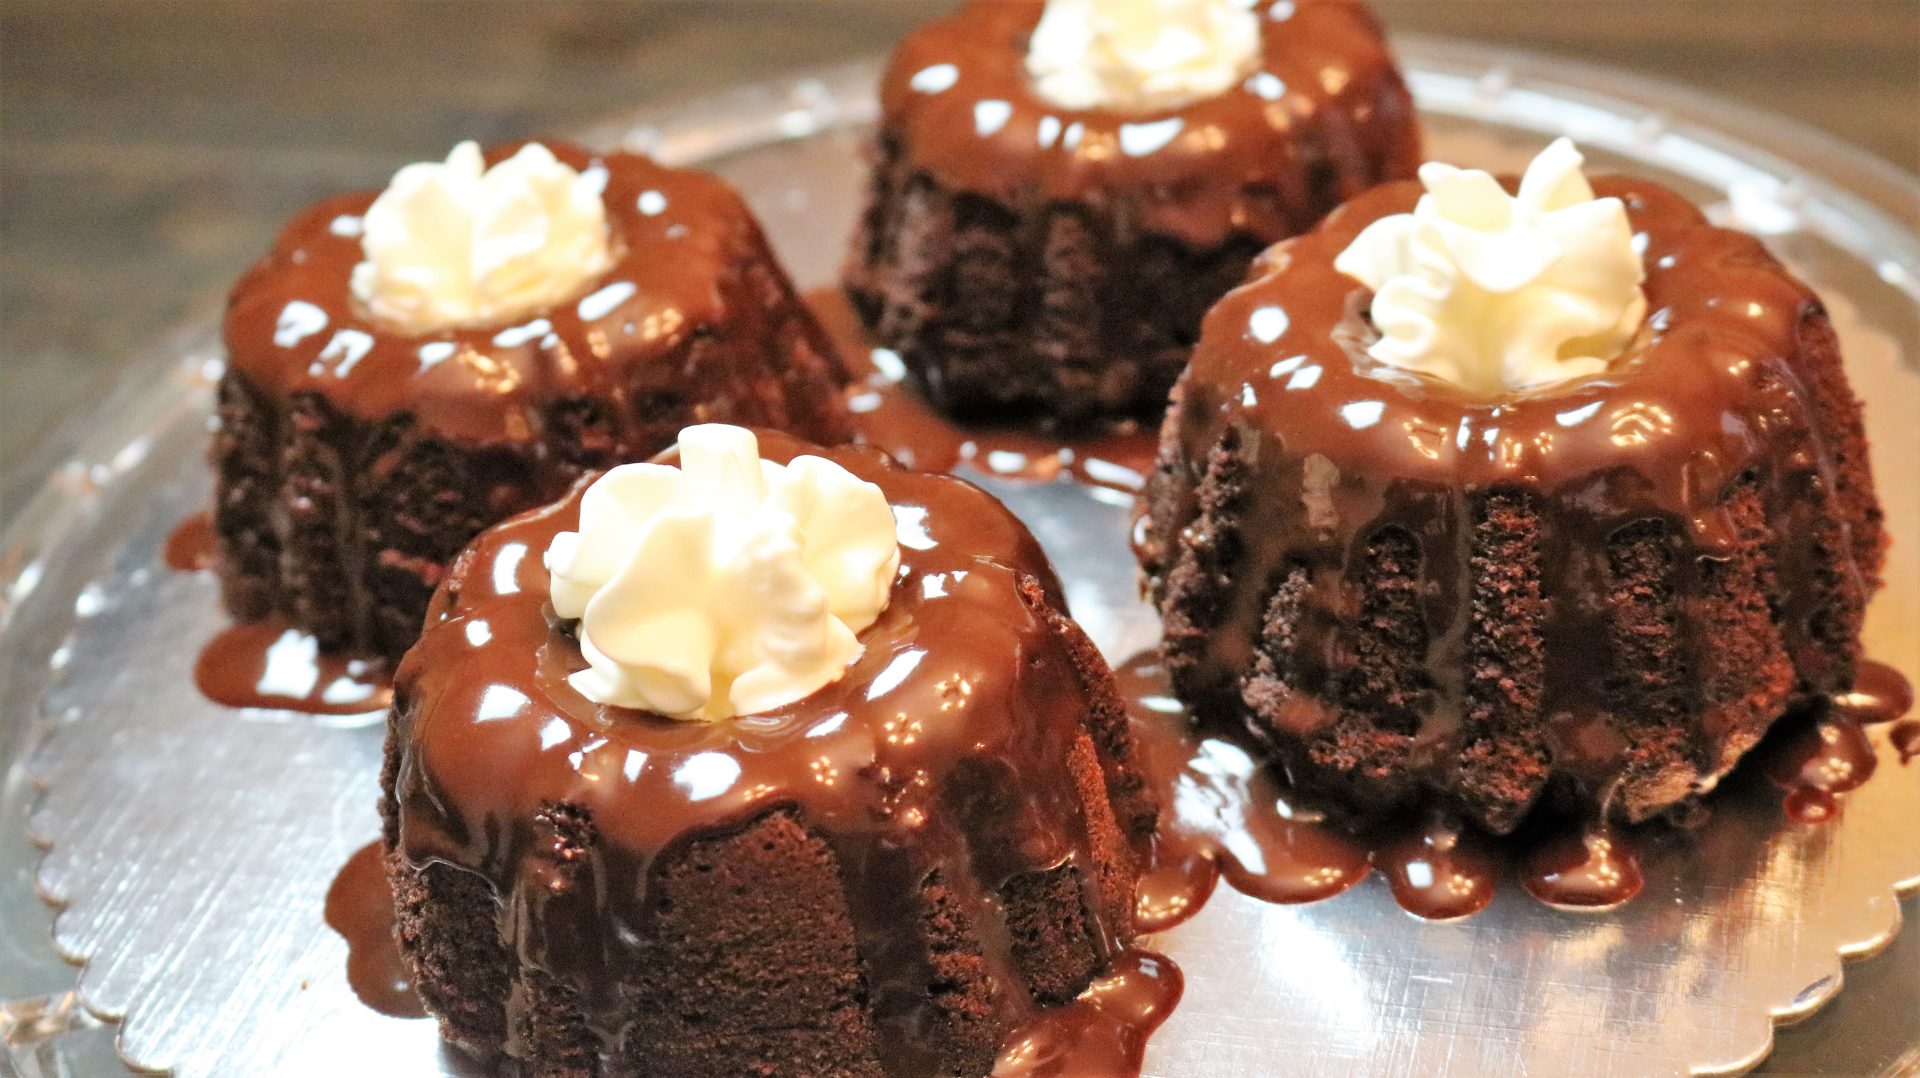 A plate of chocolate cakes with white frosting.